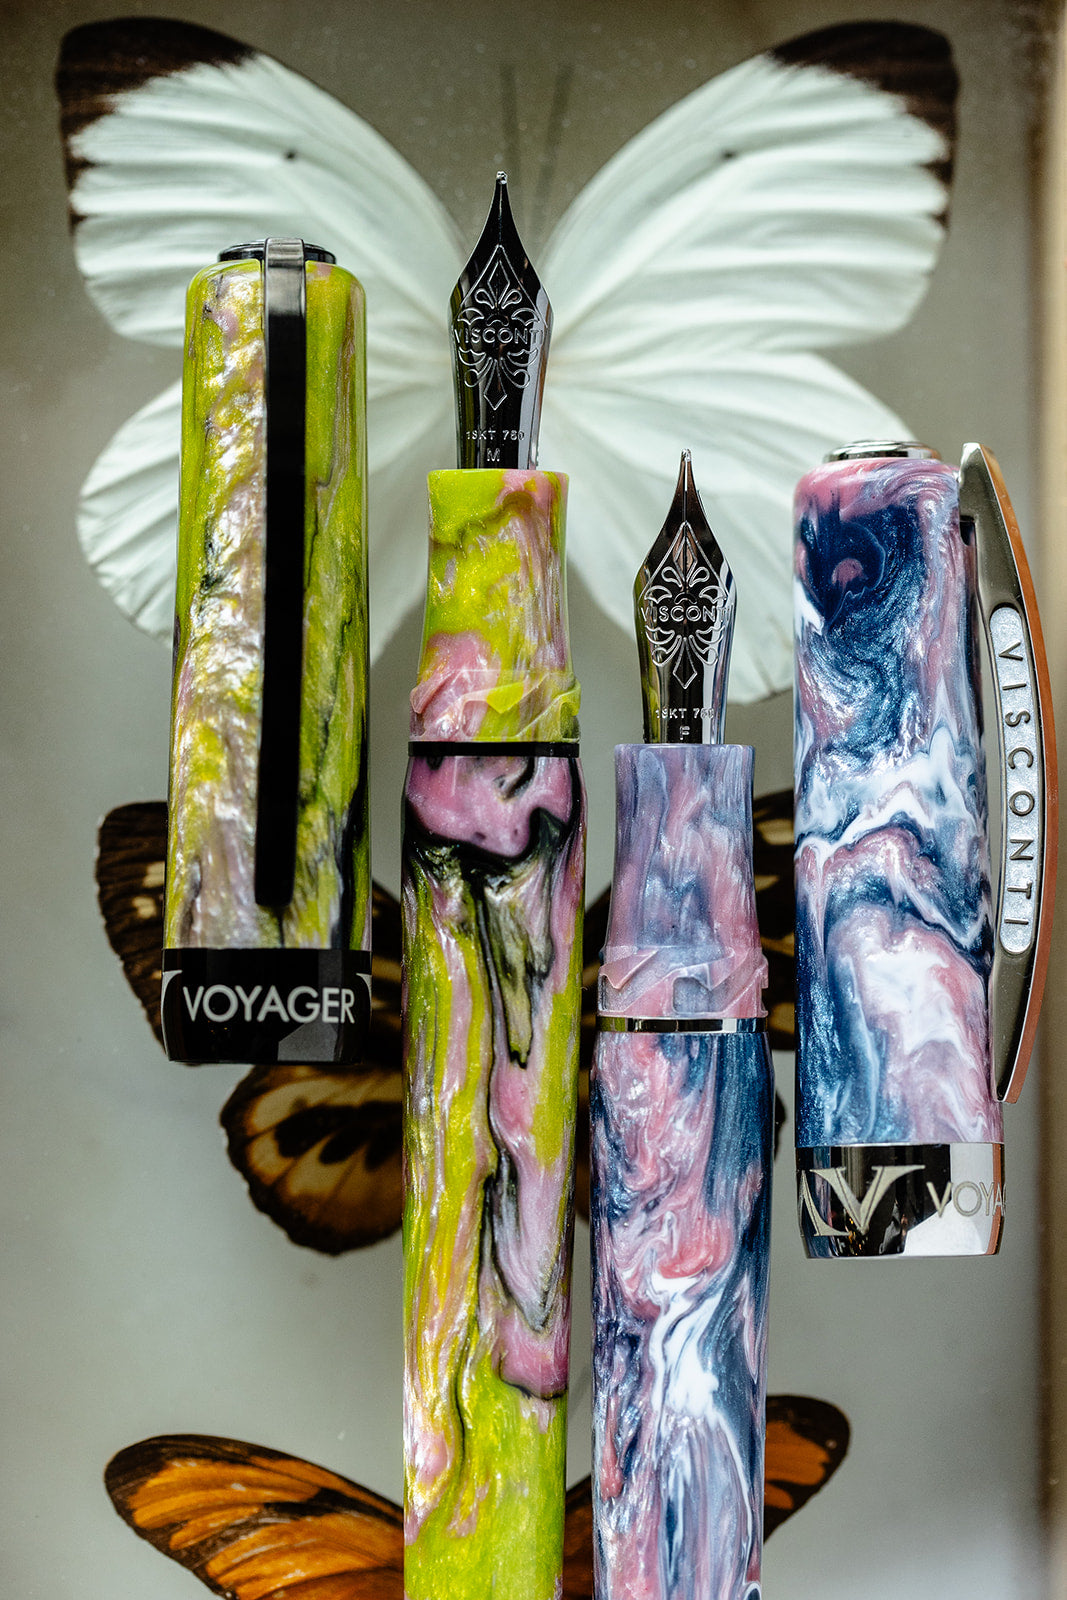 Visconti Voyager Mariposa Painted Beauty Fountain Pen swirled resin